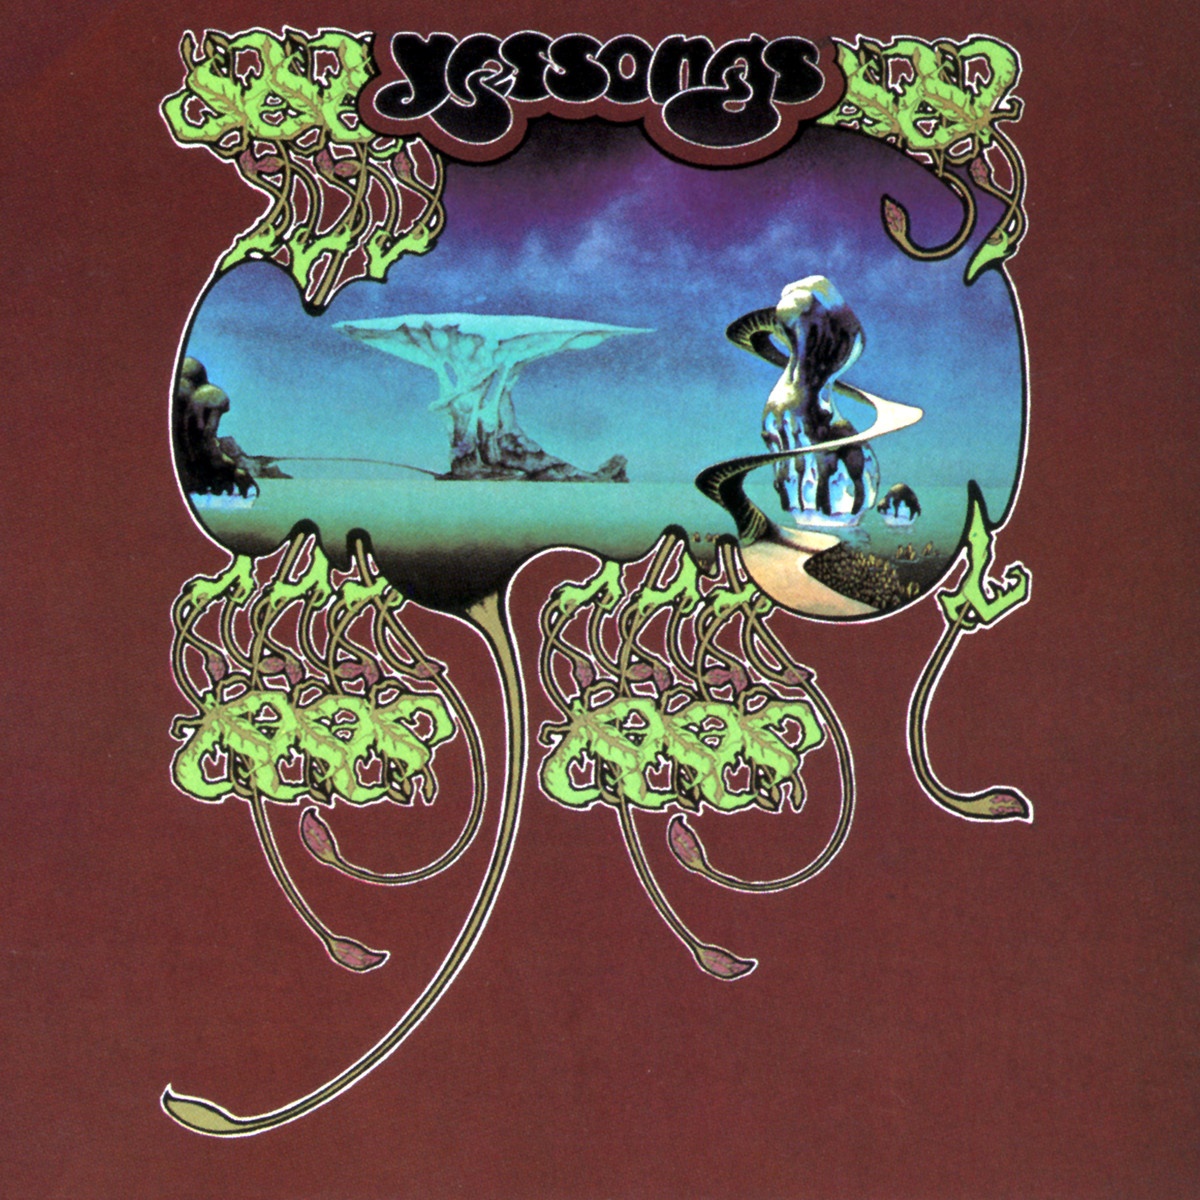 Opening (Excerpt From "Firebird Suite") (Live LP Version From Yessongs)